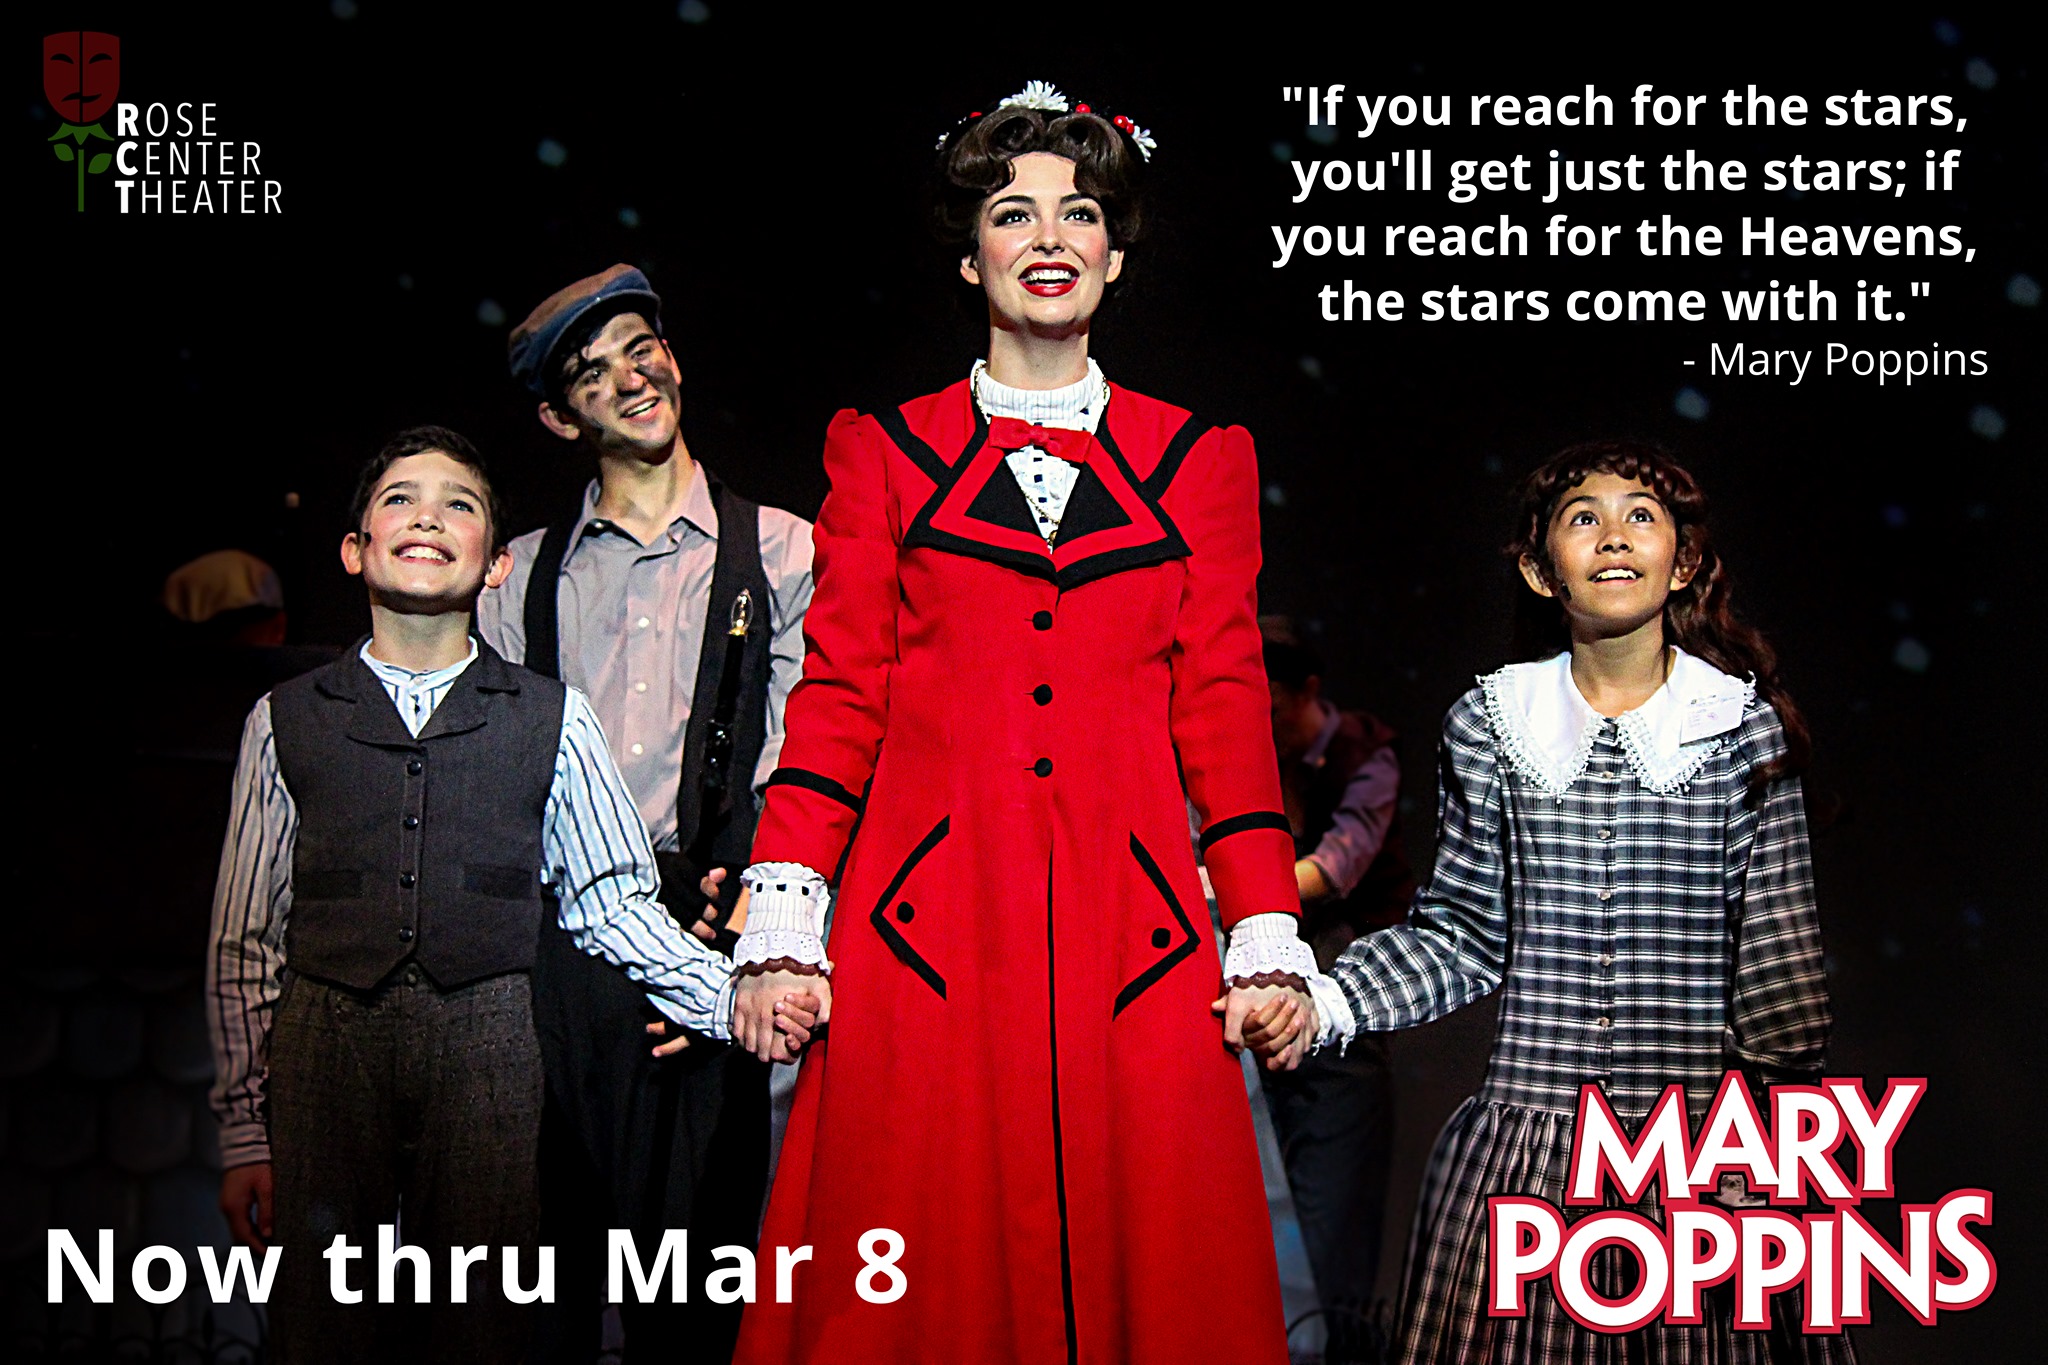 Adrienne Amanda Morrow as Jane Banks in Mary Poppins at Rose Center Theater - February-March, 2020